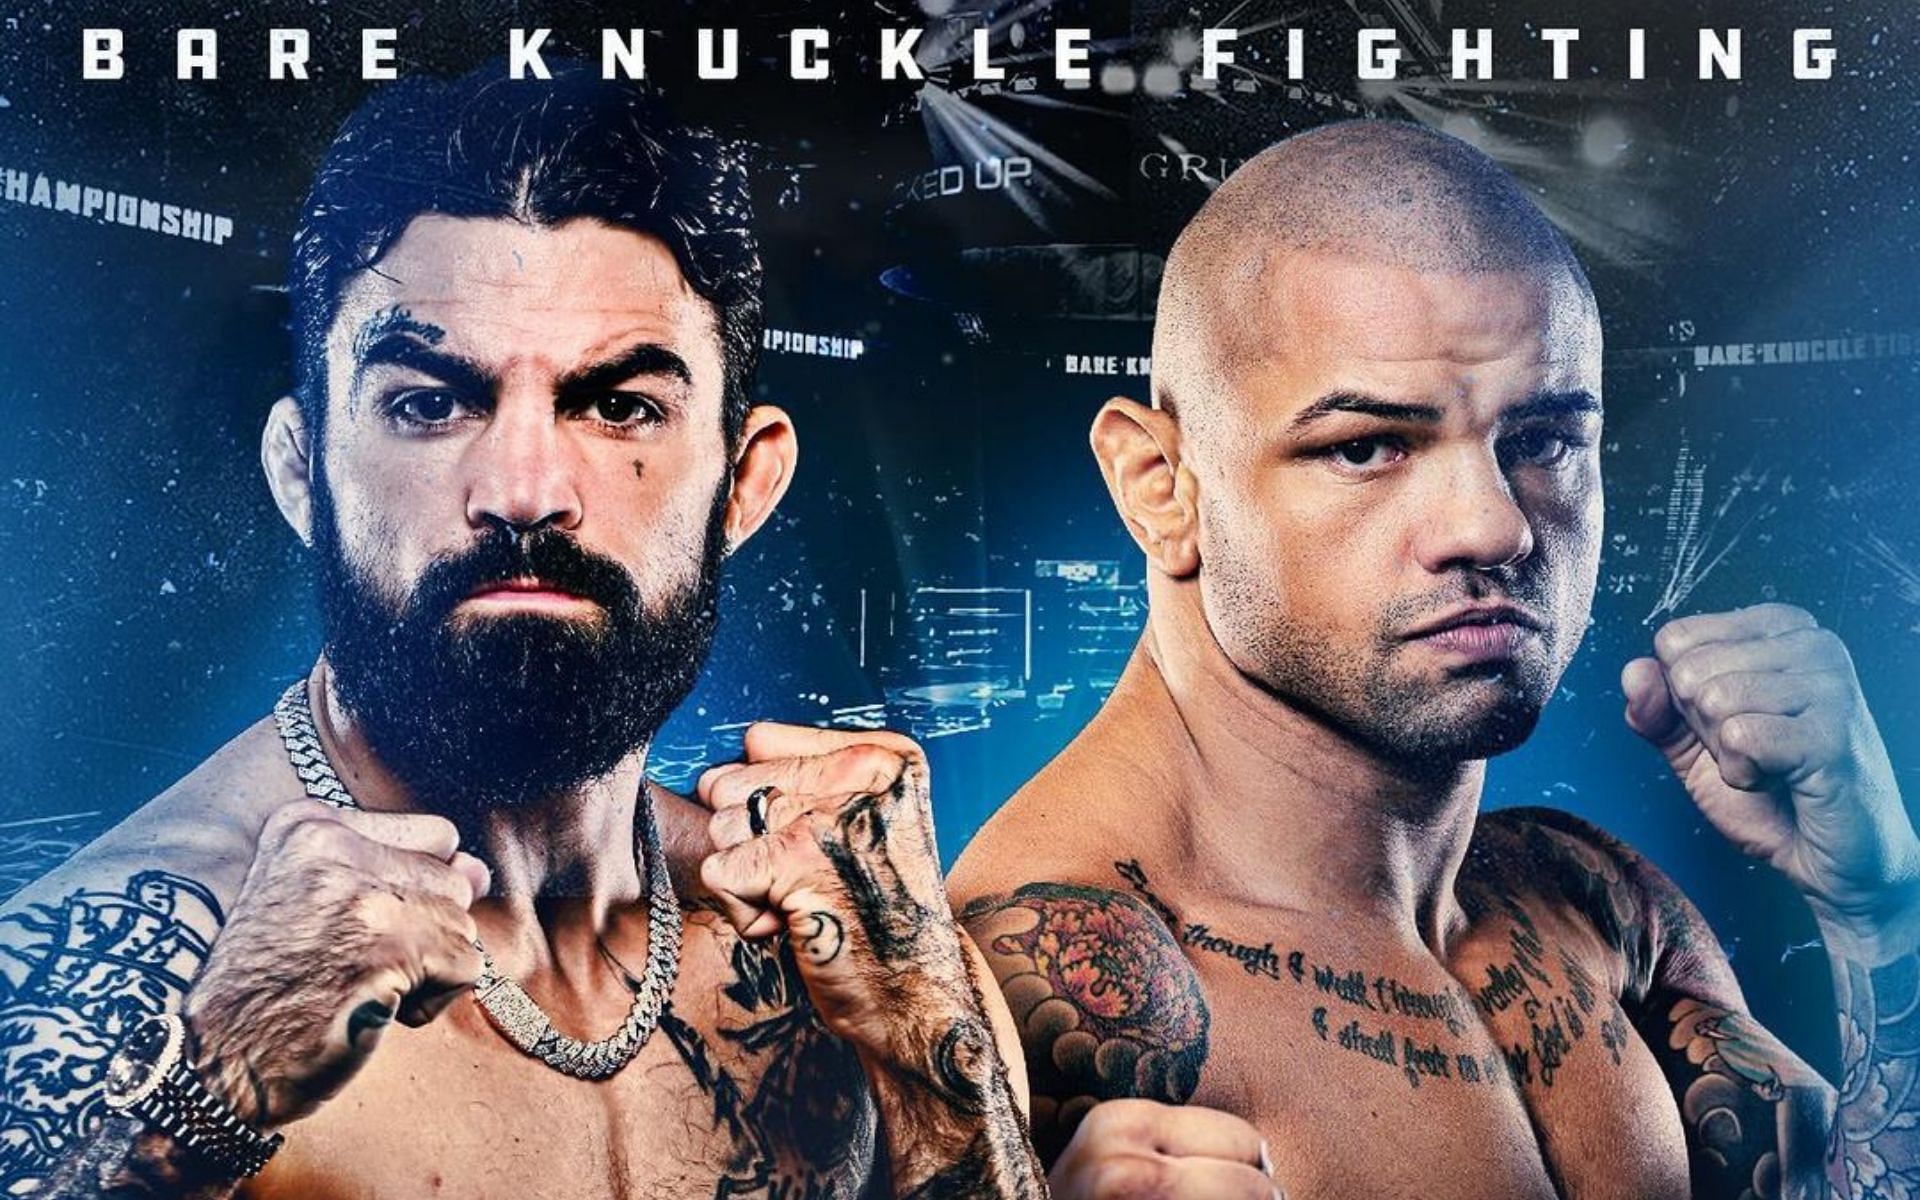 Mike Perry (left) vs. Thiago Alves (right) will headline BKFC IV [Image courtesy of @bareknuckle on Instagram]